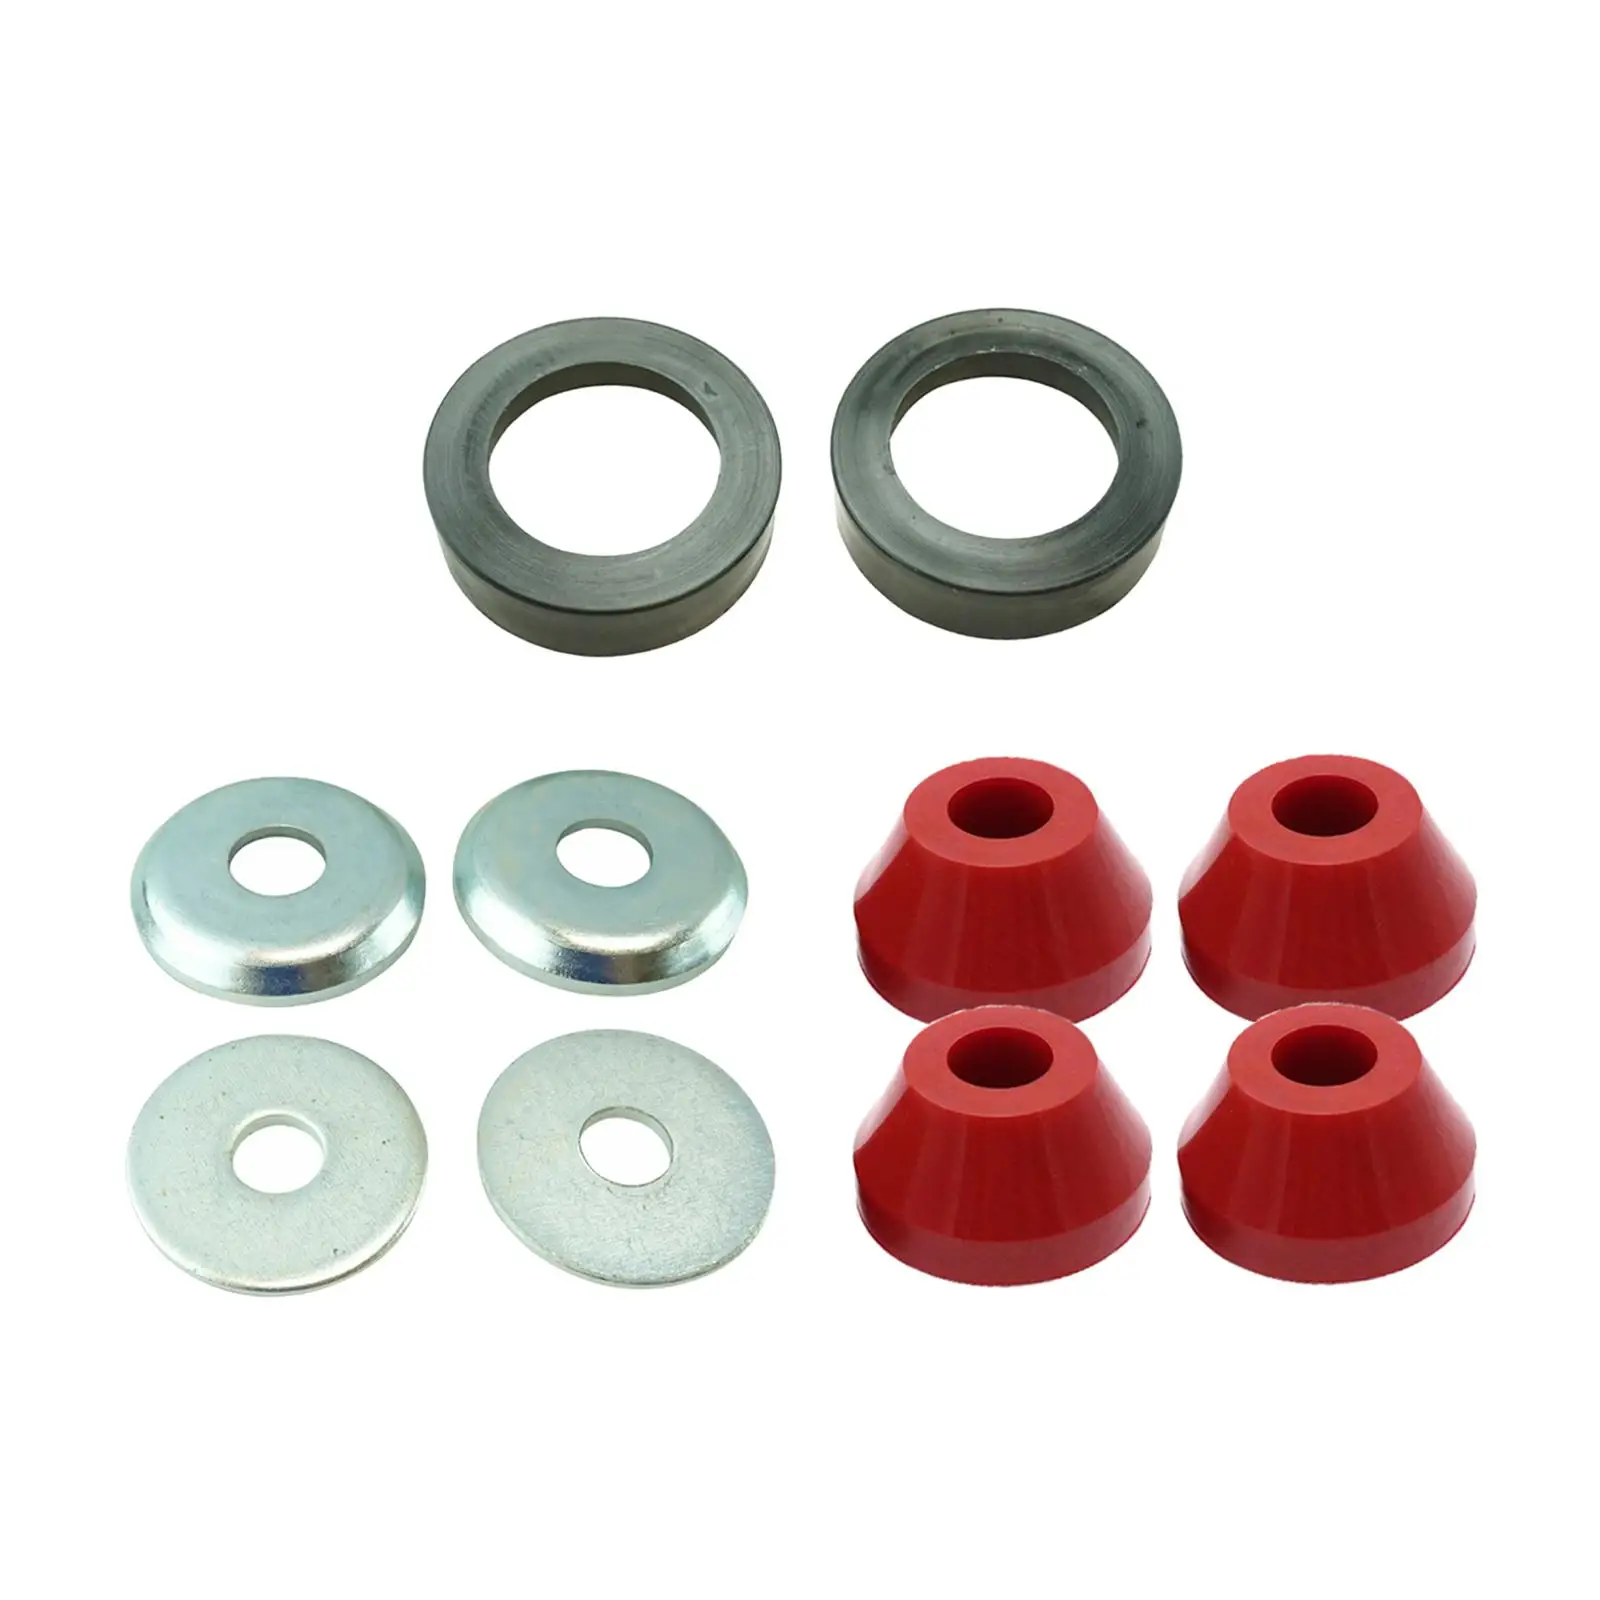 Radius Arm Bushing Parts Easy to Install Professional Accessories Replaces for